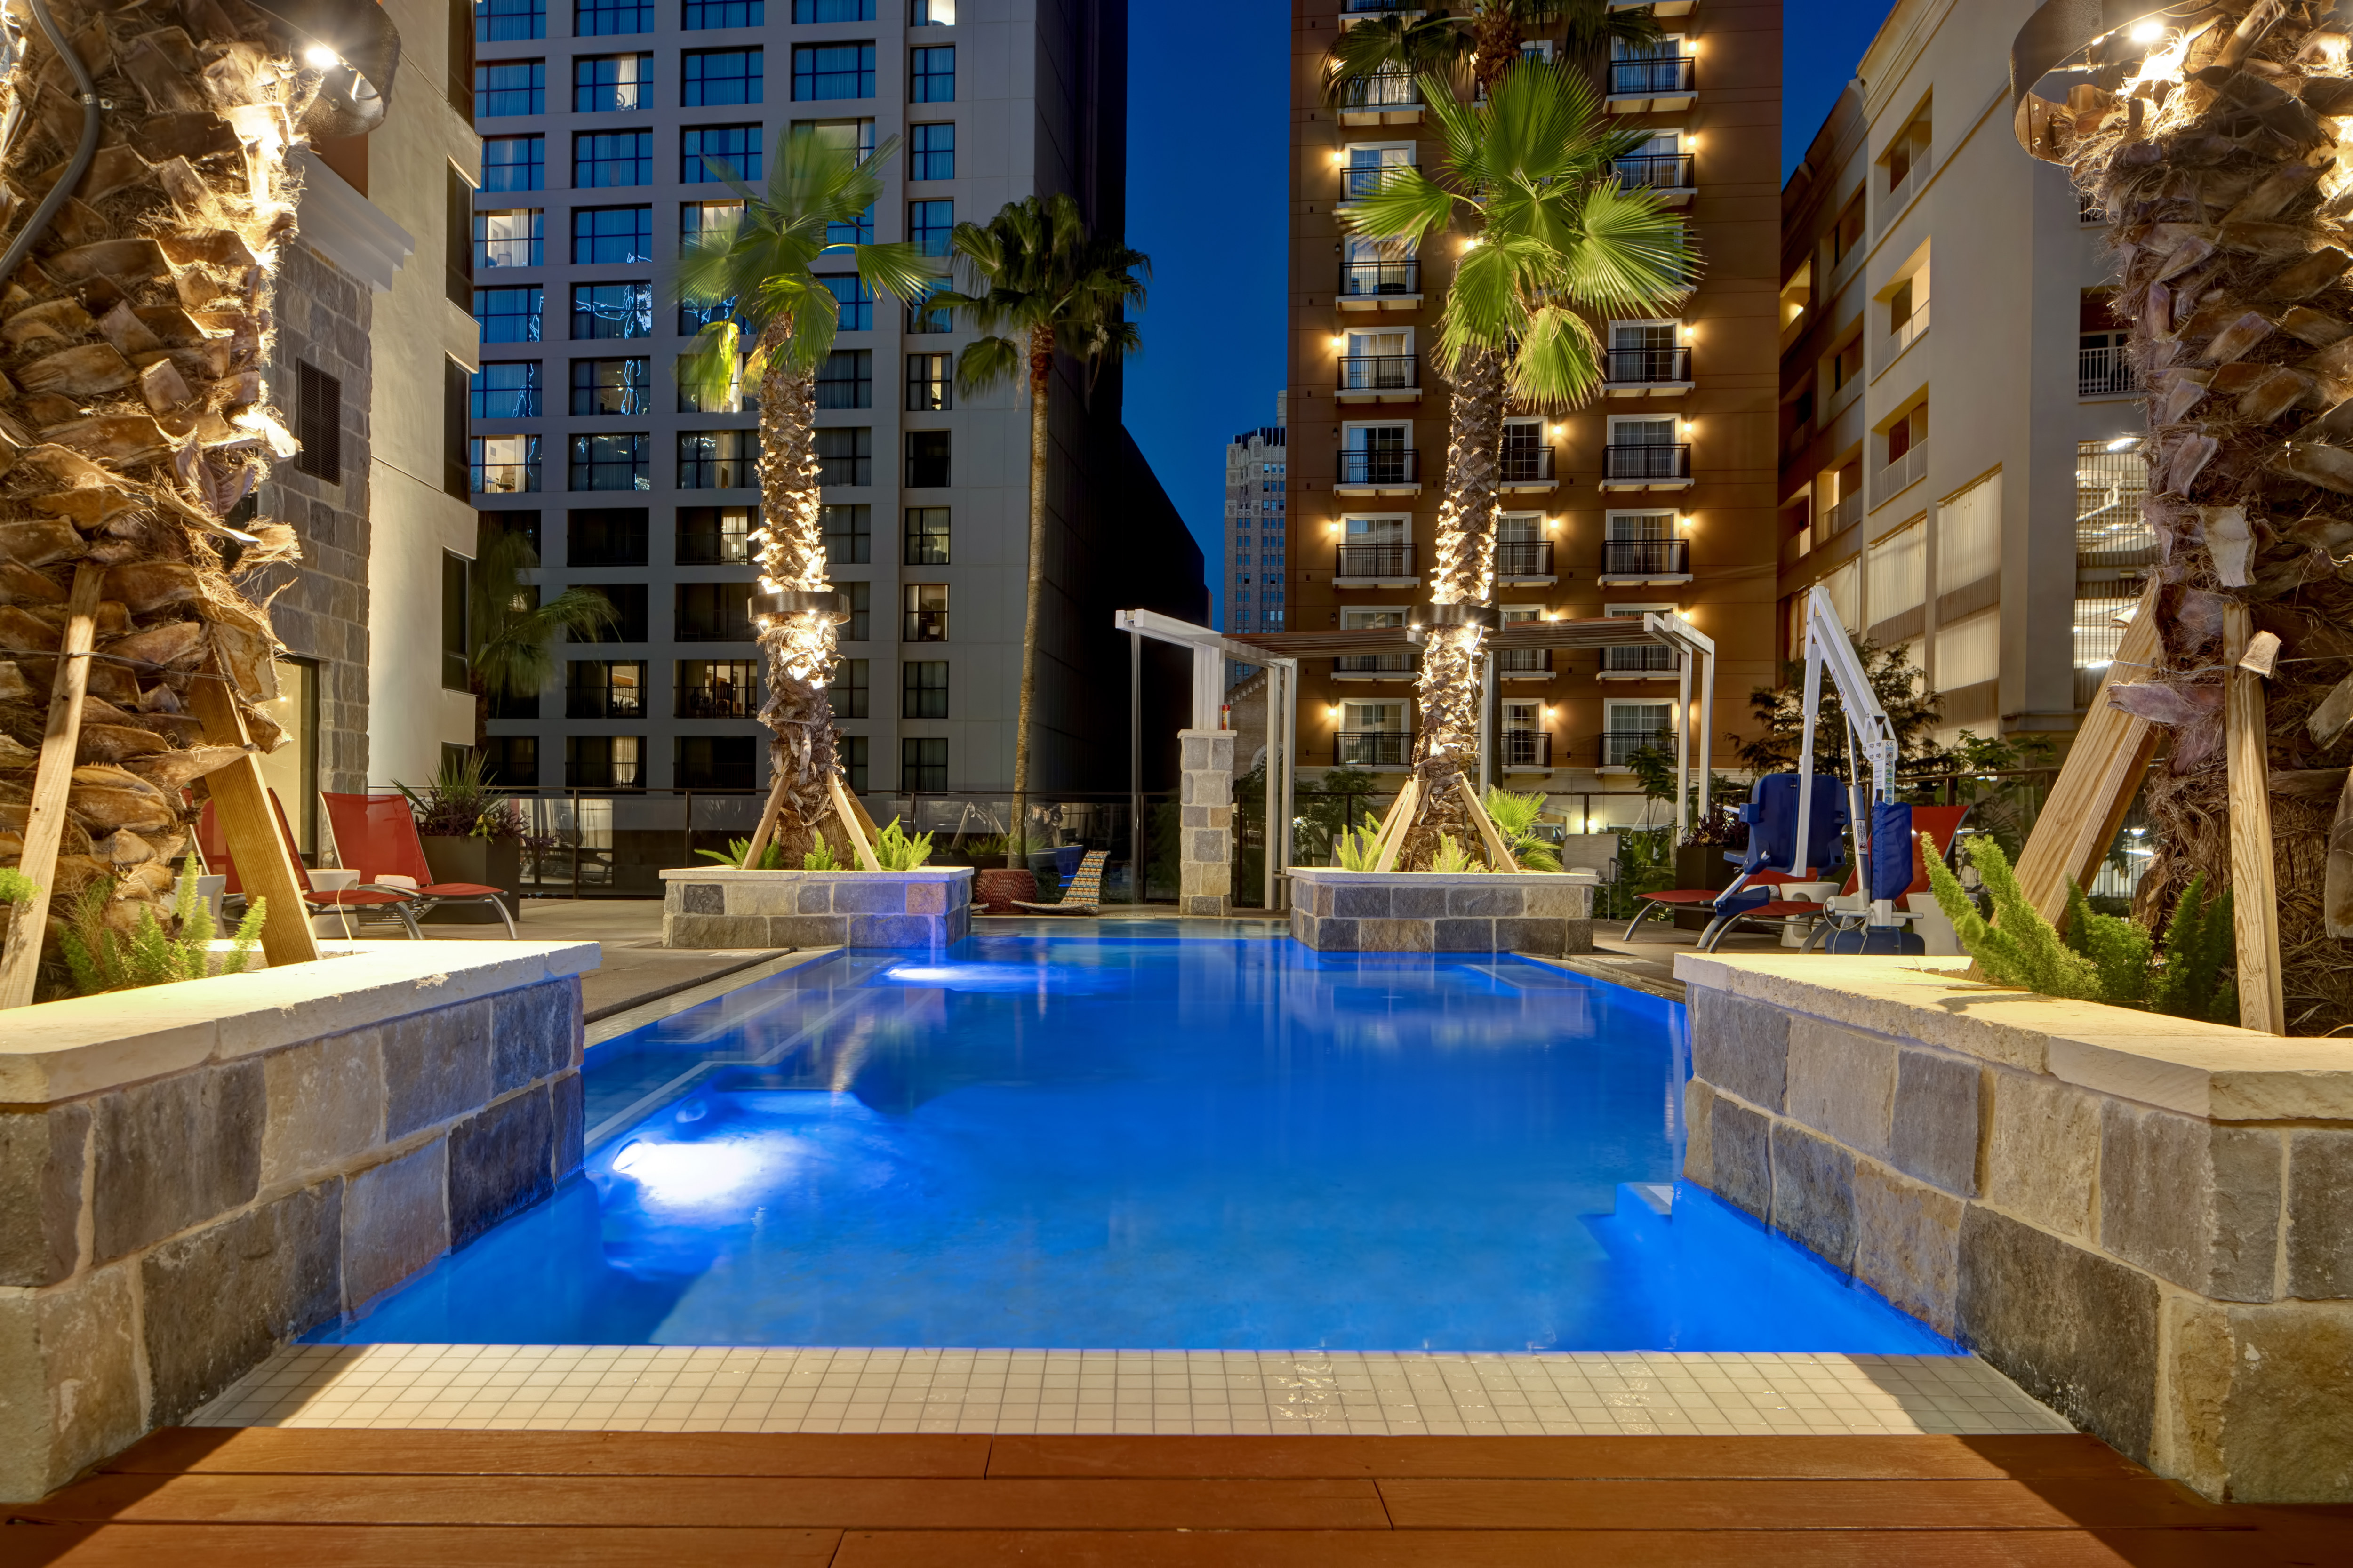 outdoor pool and patio at dusk